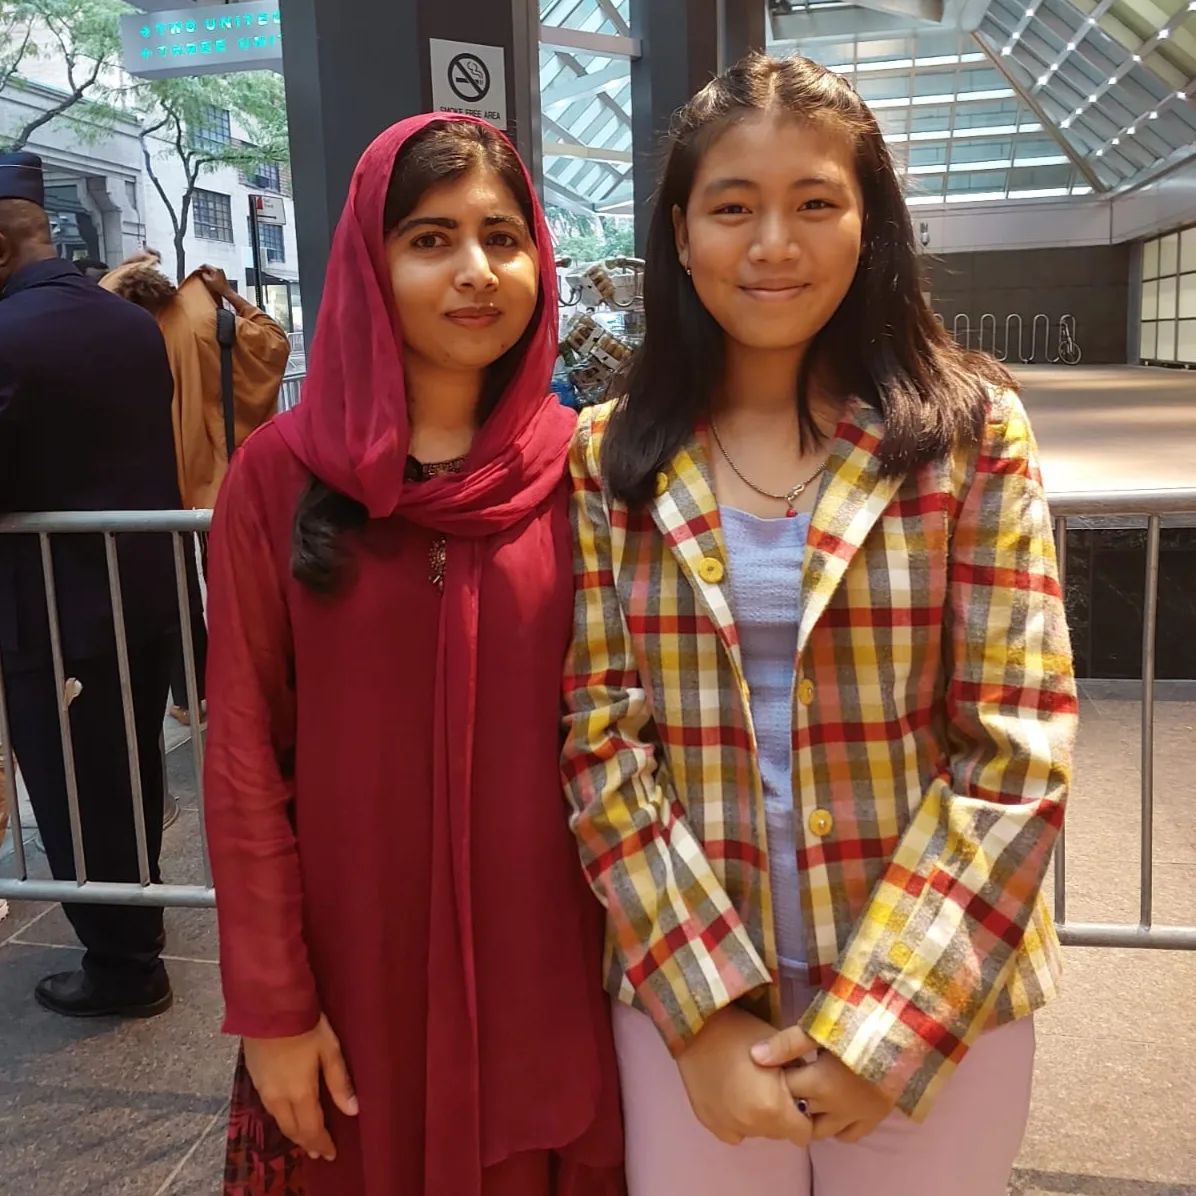 Finally I met my inspiration @Malala today! ❤

She is not just the torchbearer for girl's education, she is also a beacon of hope for millions of young children like me. We discussed about various challenges we're facing. There will be no climate justice without girl's education!

And thanks for visiting me despite your tight schedule. 🙏🏻